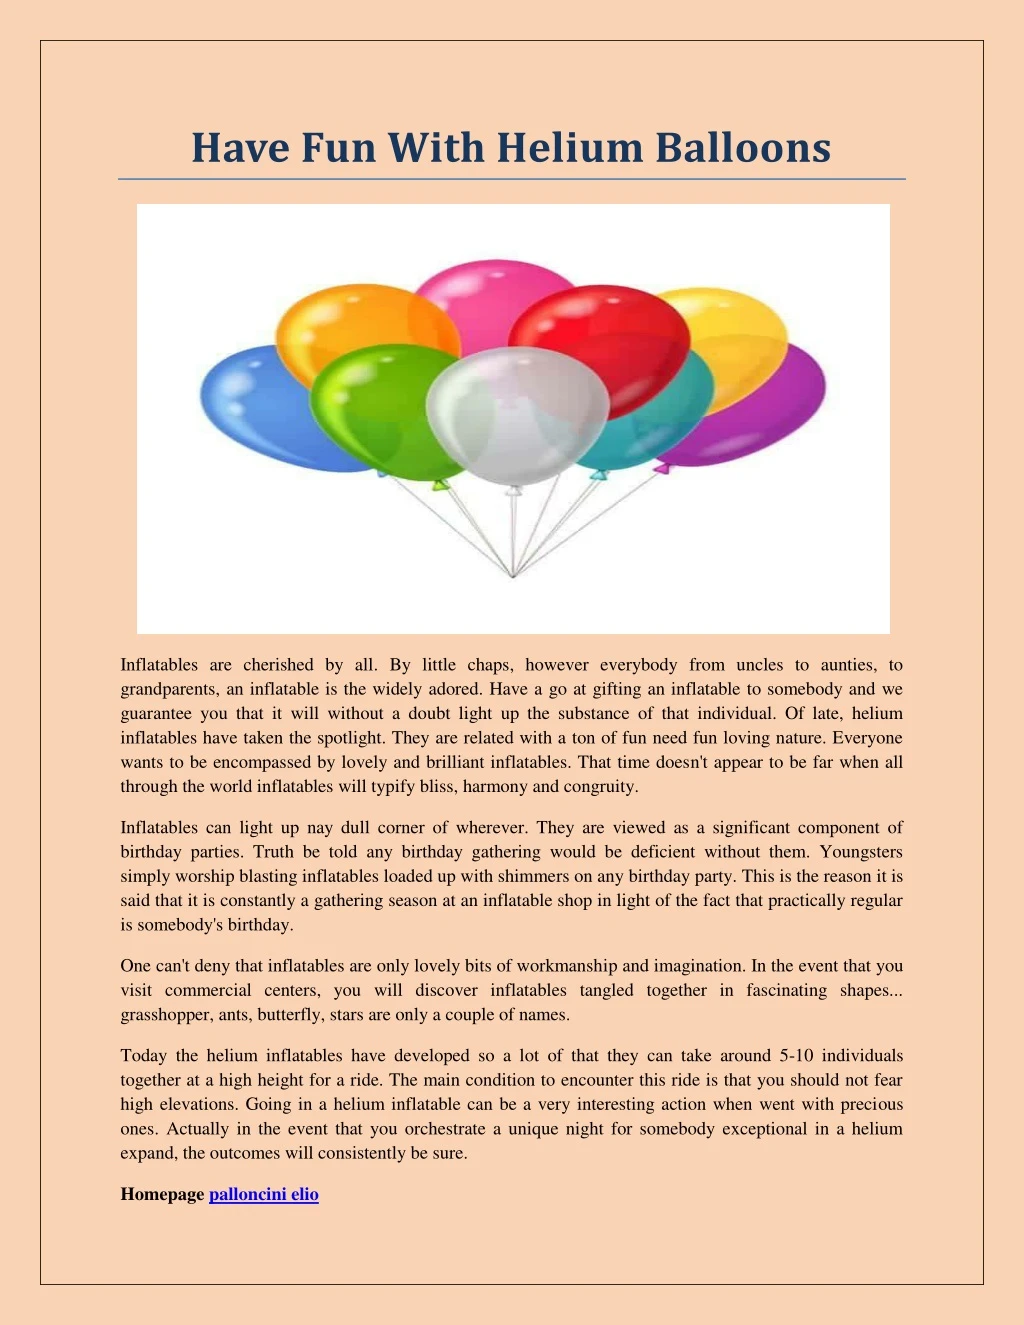 have fun with helium balloons